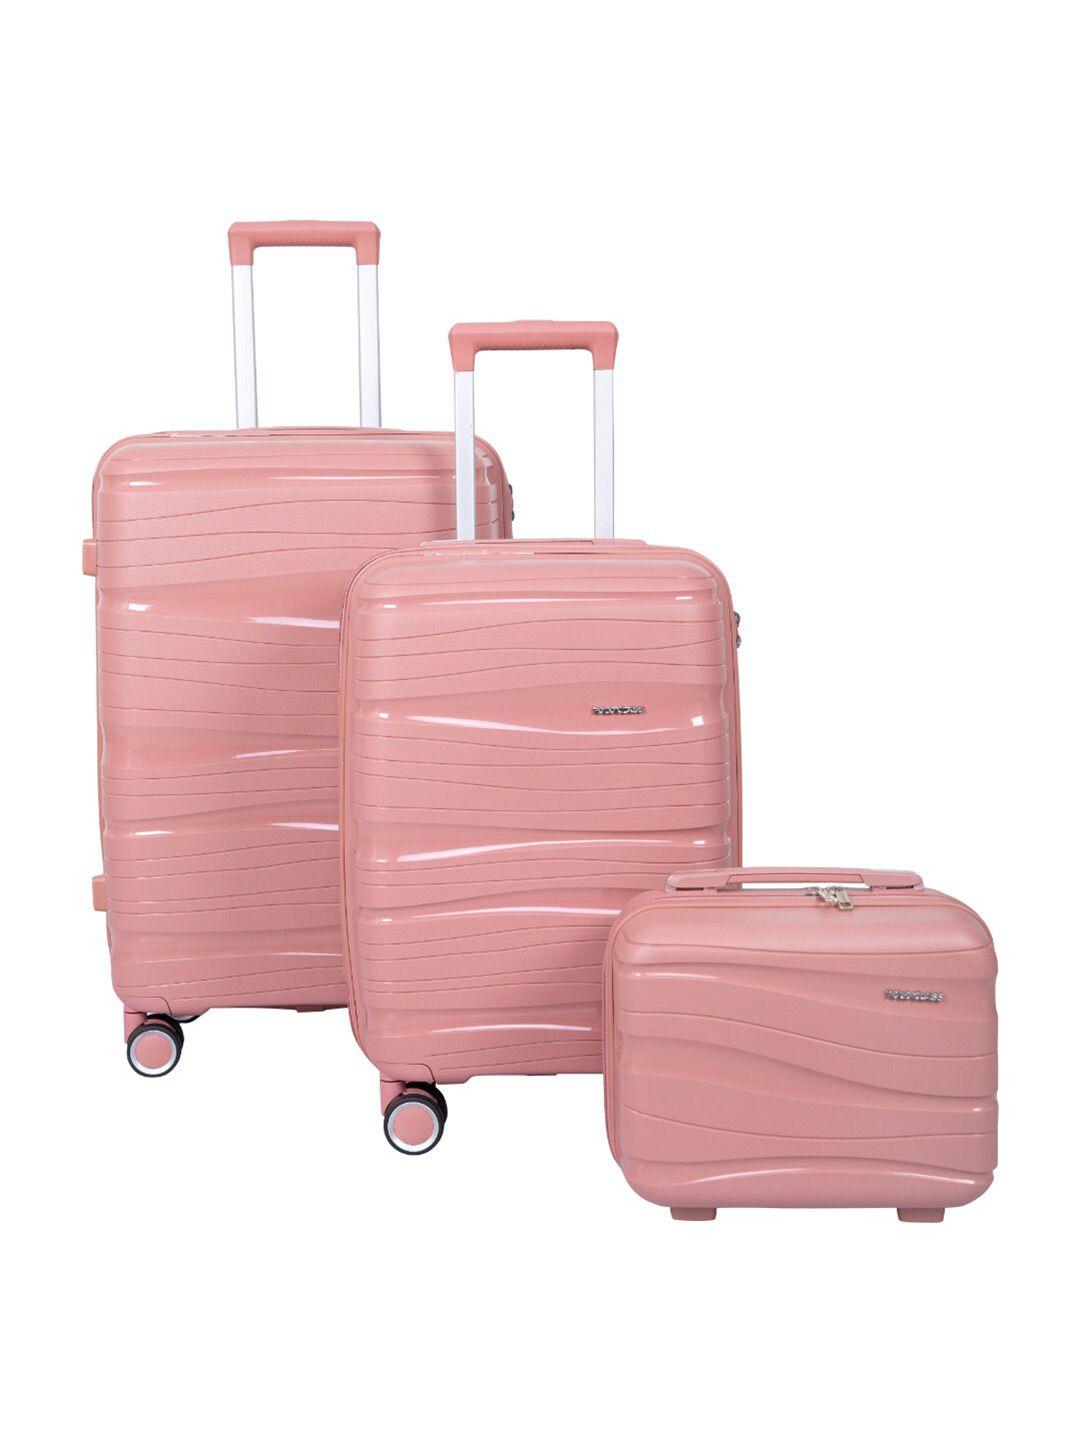 polo class set of 3 textured hard-sided trolley suitcases bags 70 l